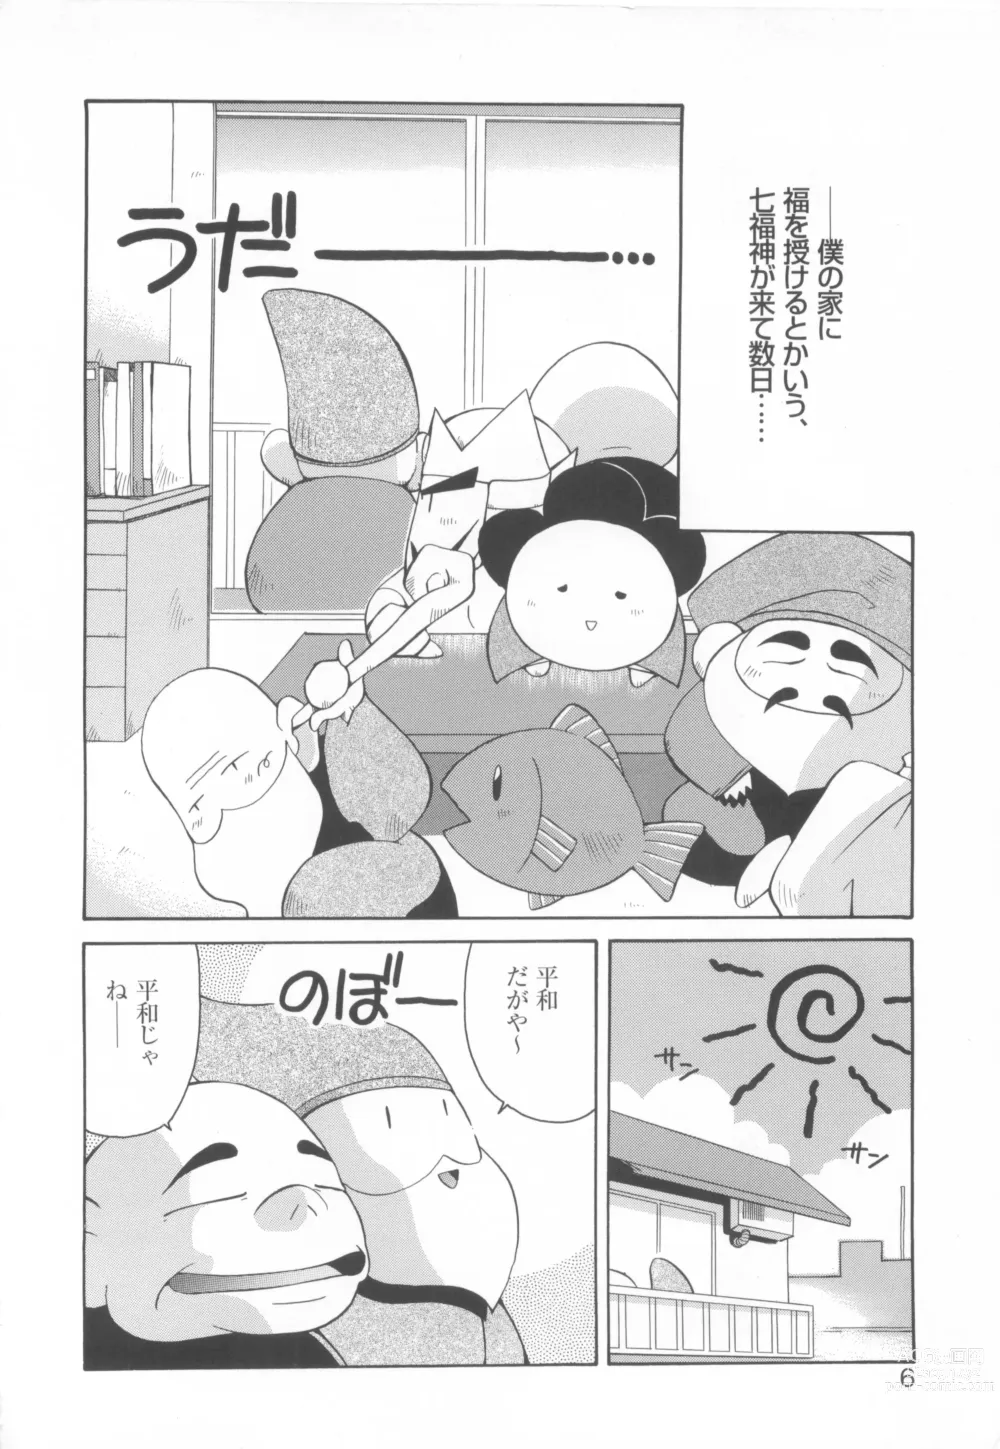 Page 8 of manga CAN CAN BUNNY ANTHOLOGY COMIC 2